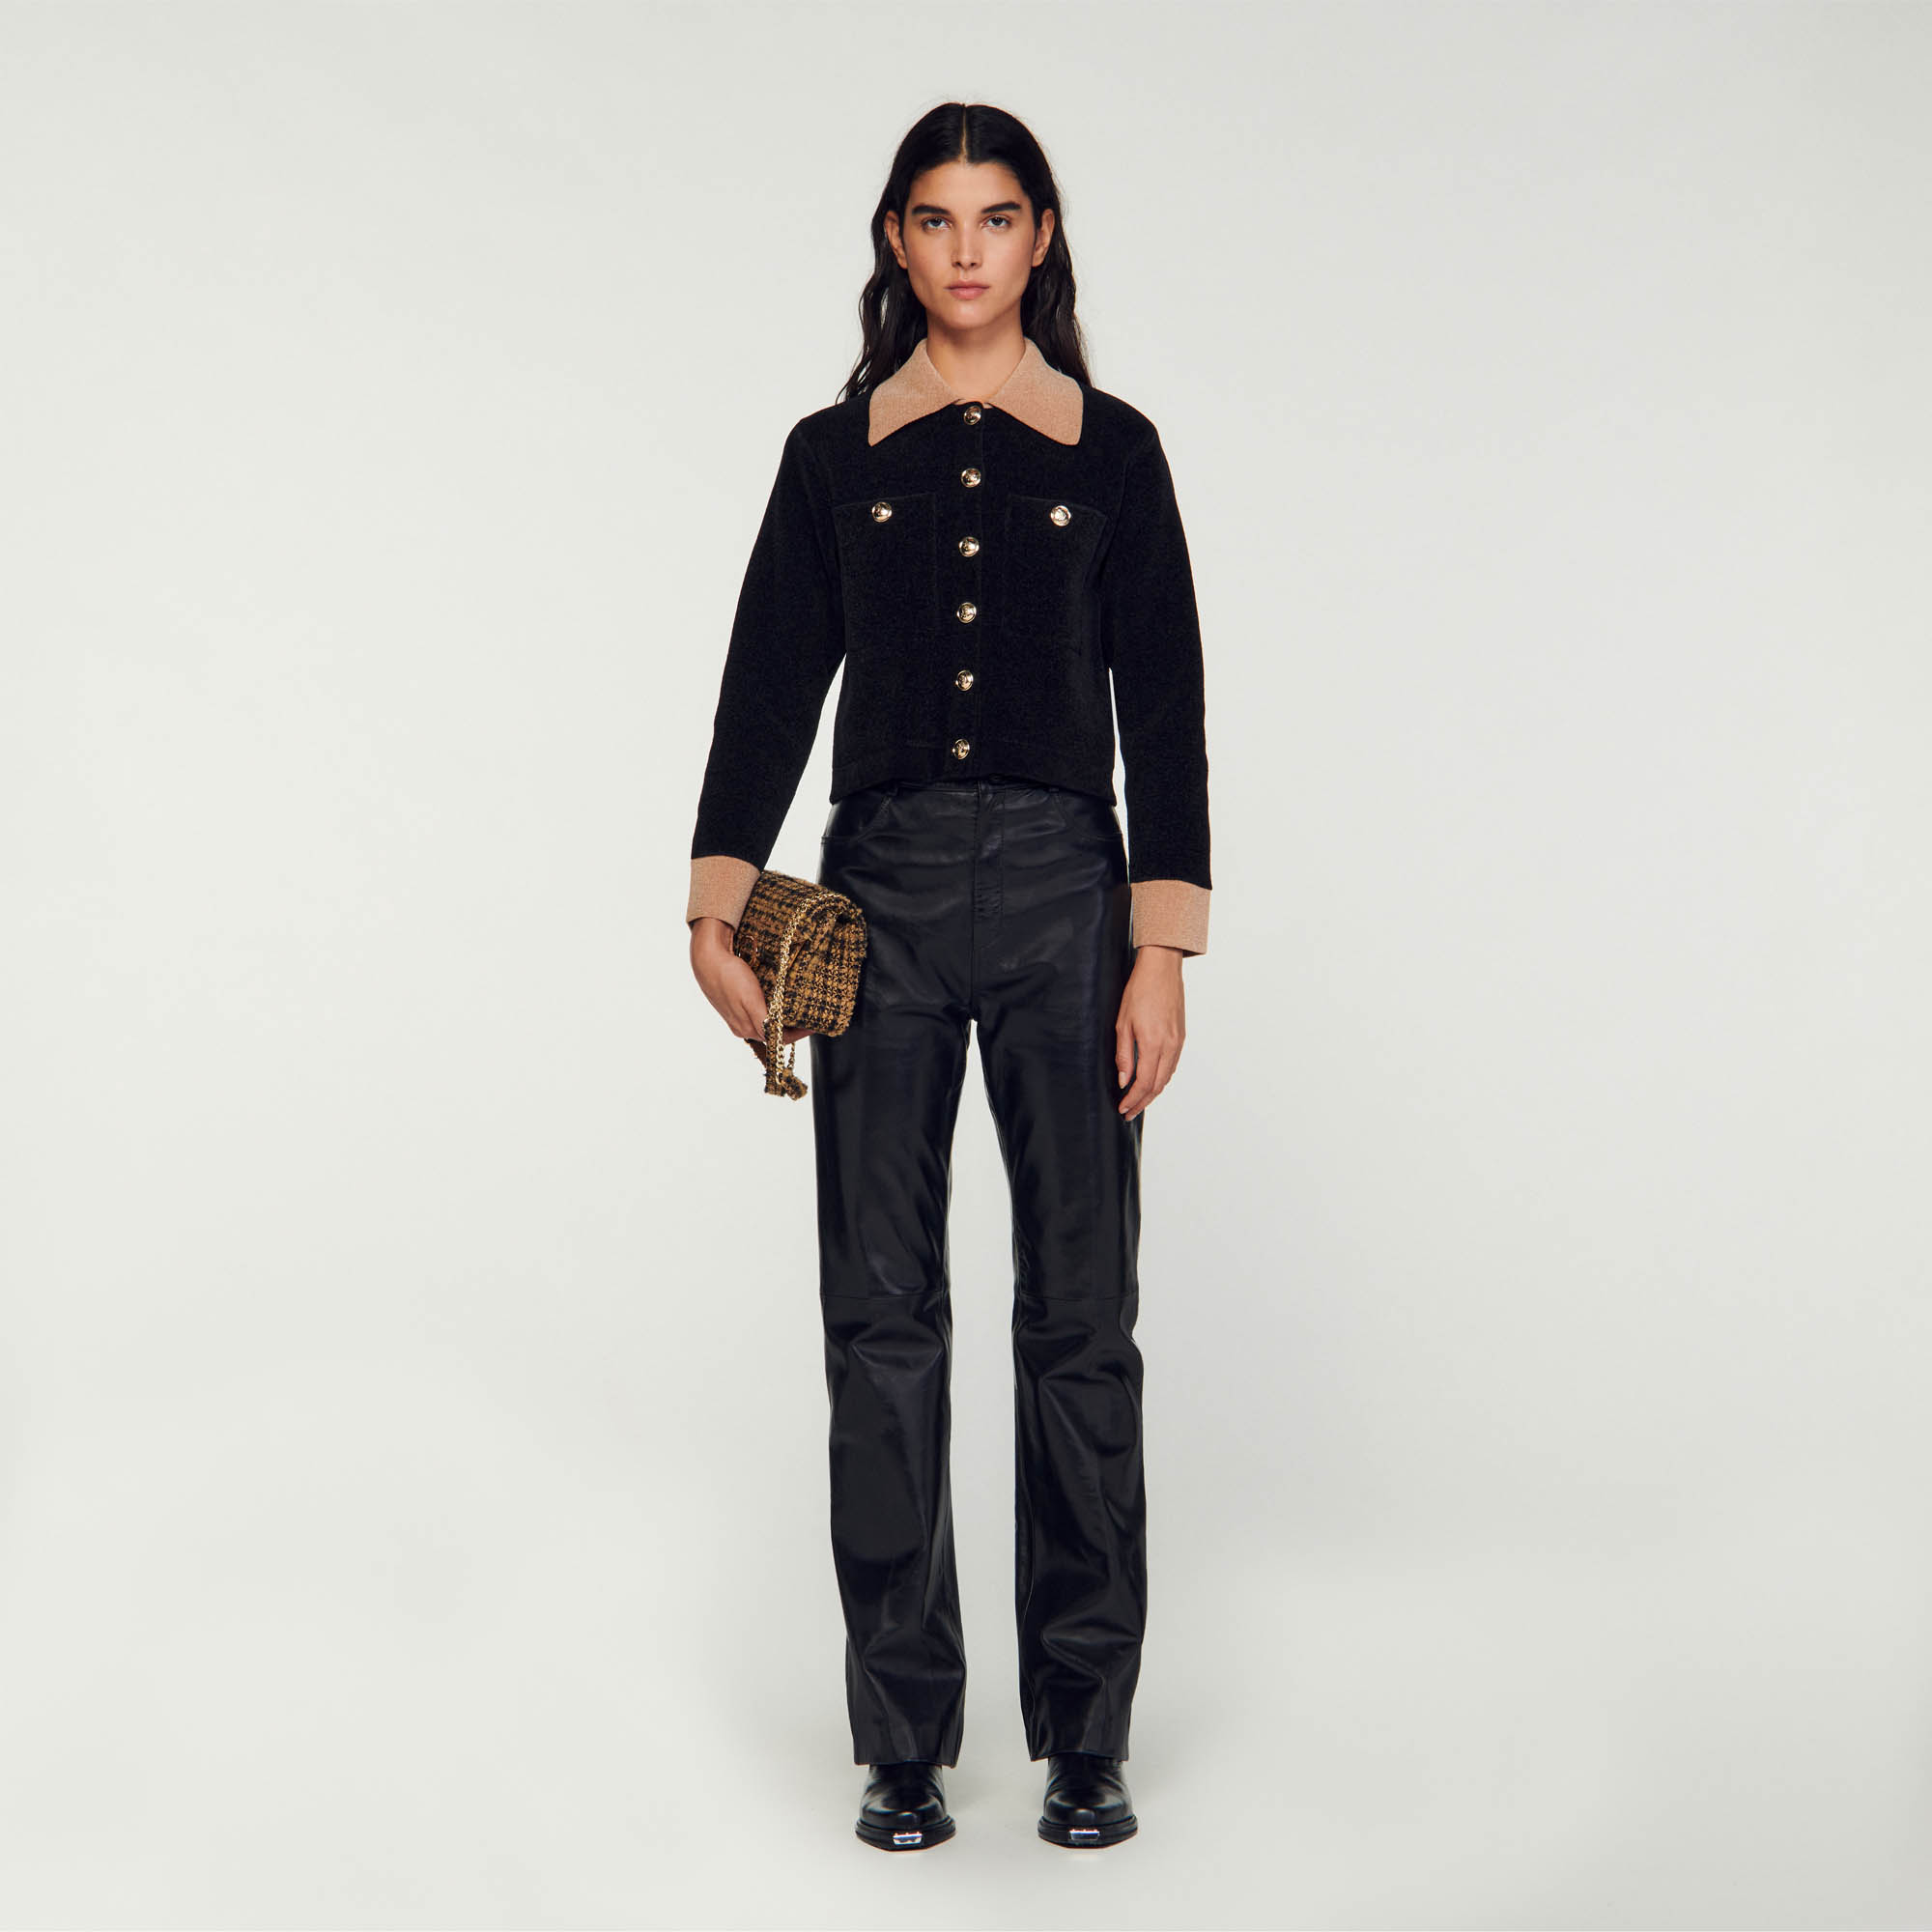 Sandro viscose Cropped velour knit coatigan with a contrasting shirt collar and cuffs, patch pockets on the chest, and a military button fastening